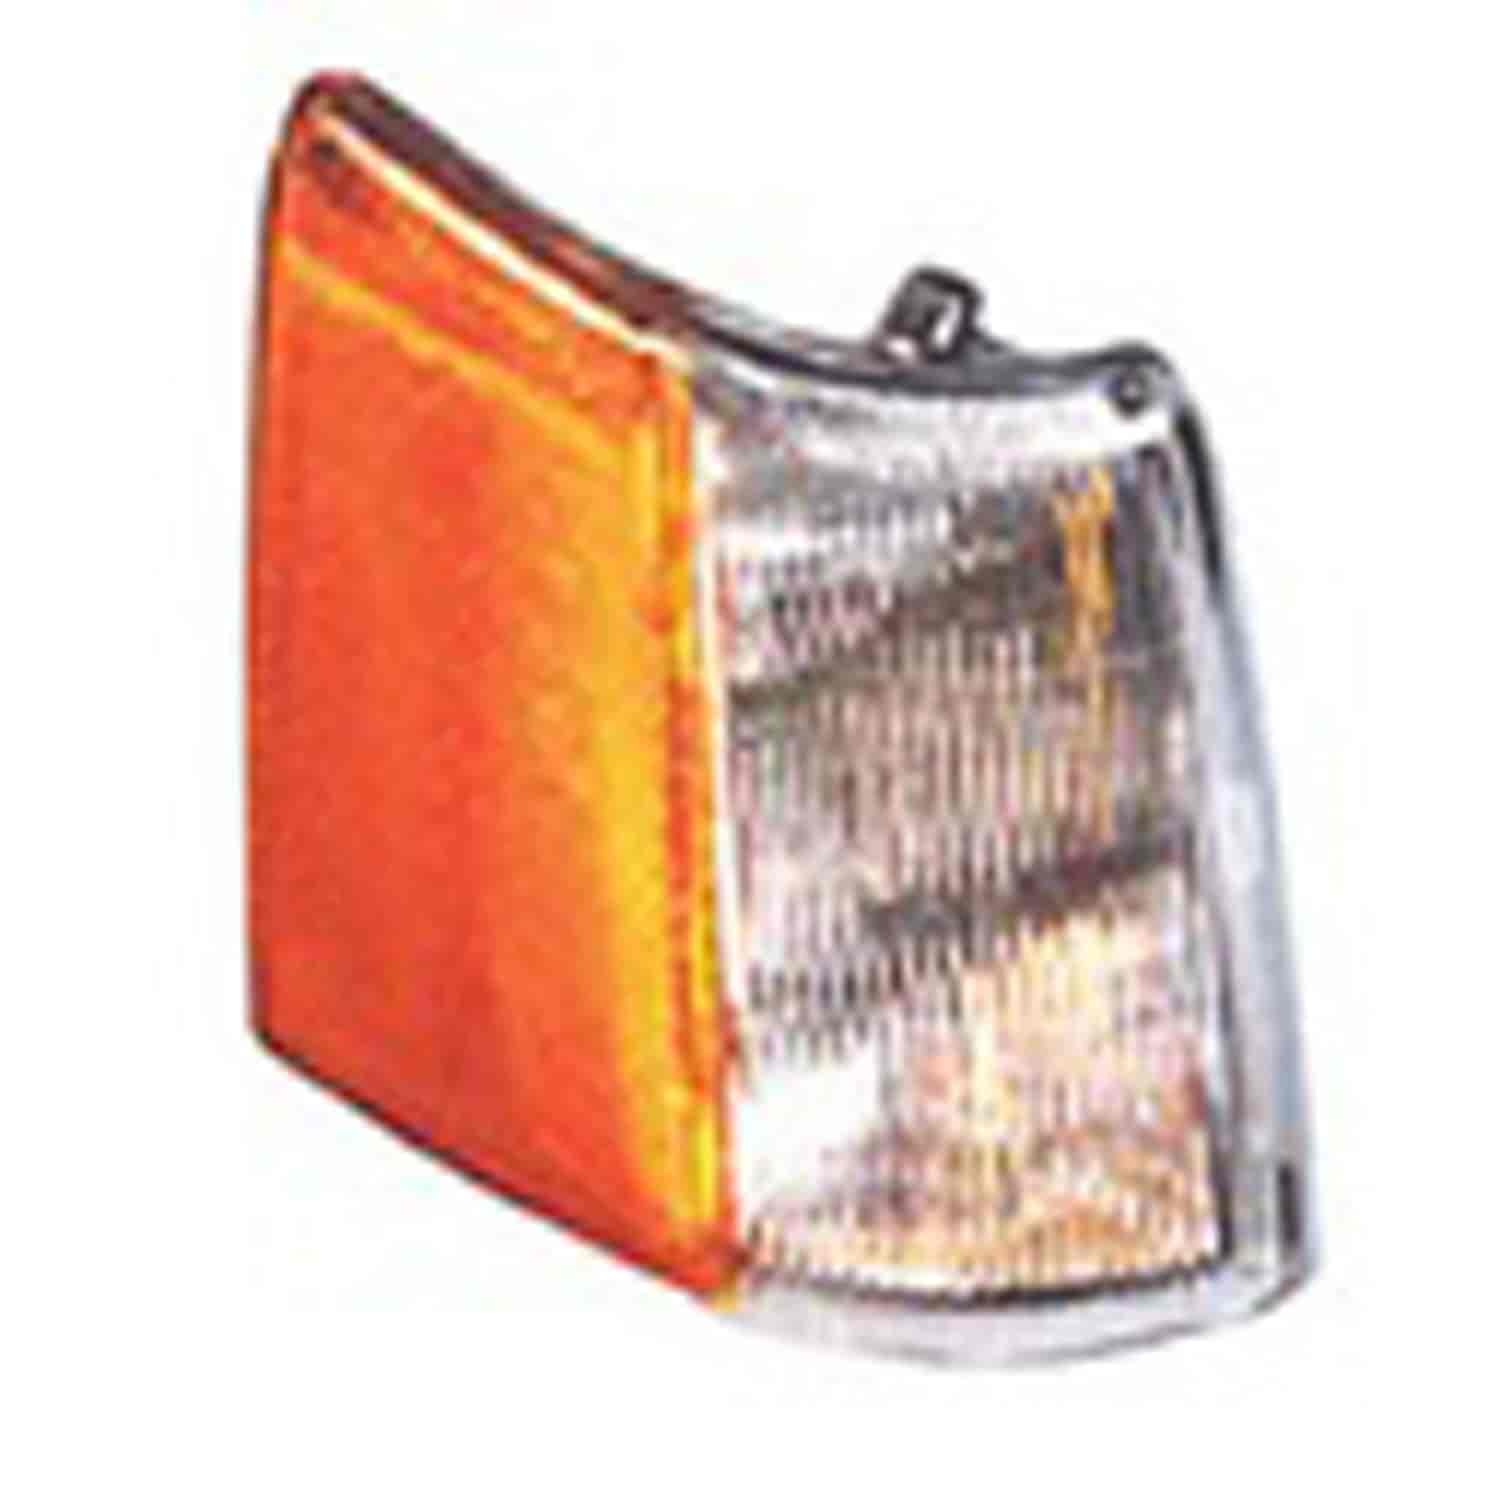 Replacement parking lamp from Omix-ADA, Fits left side on 93-98 Jeep Grand Cherokee ZJ